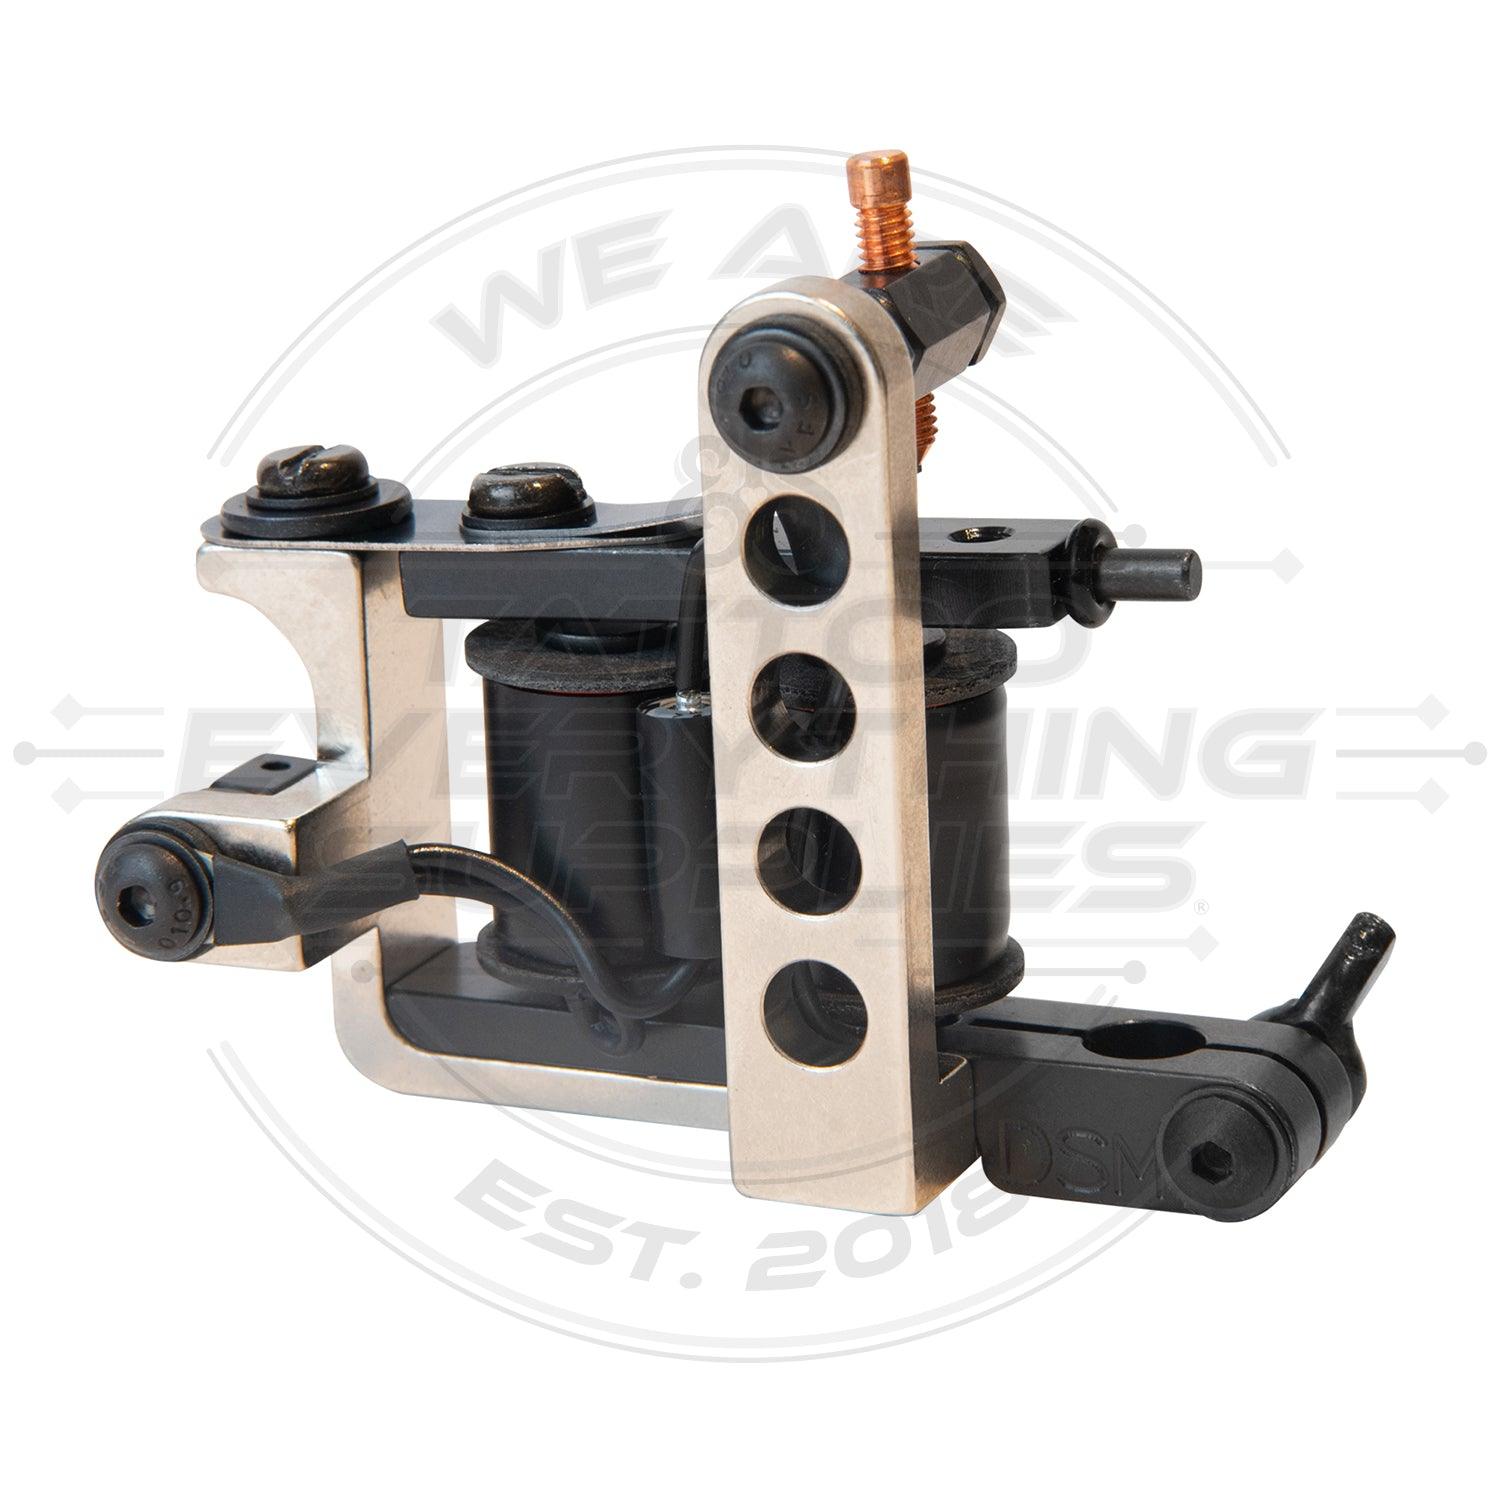 New Professional EGO Rotary Tattoo Machines Great Rotary Tattoo Machine  Motor Gun For Liner&Shader For Choose From Pompousa, $20.75 | DHgate.Com